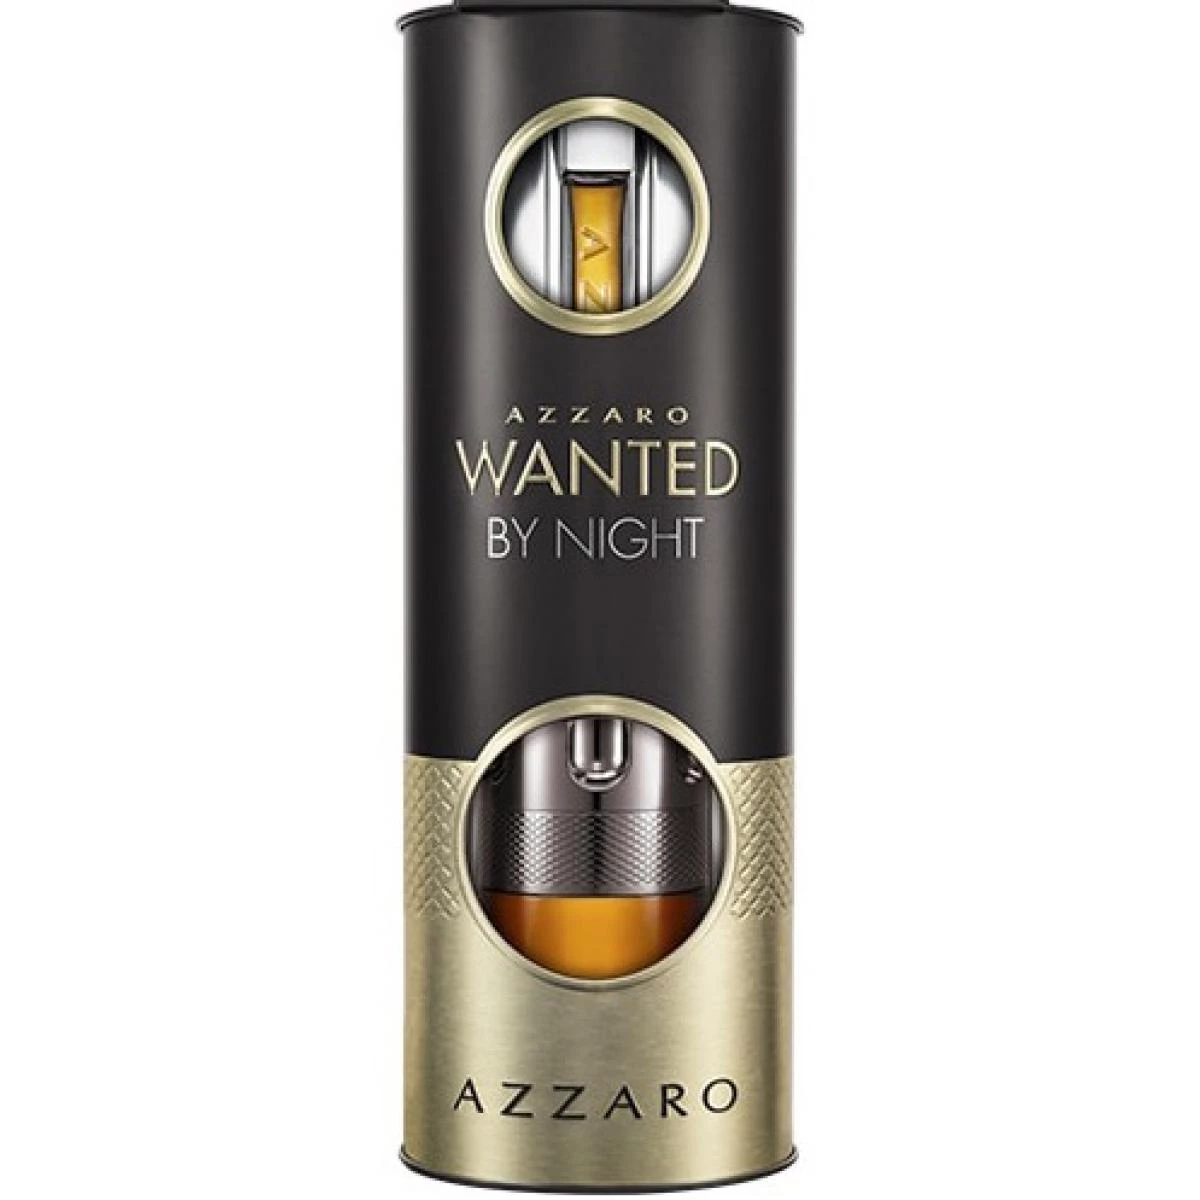 COFFRET EVENT AZZARO WANTED BY NIGHTVaporisateur Eau de Parfum 100 ml + Vaporisateur Eau de Parfum 15 ml